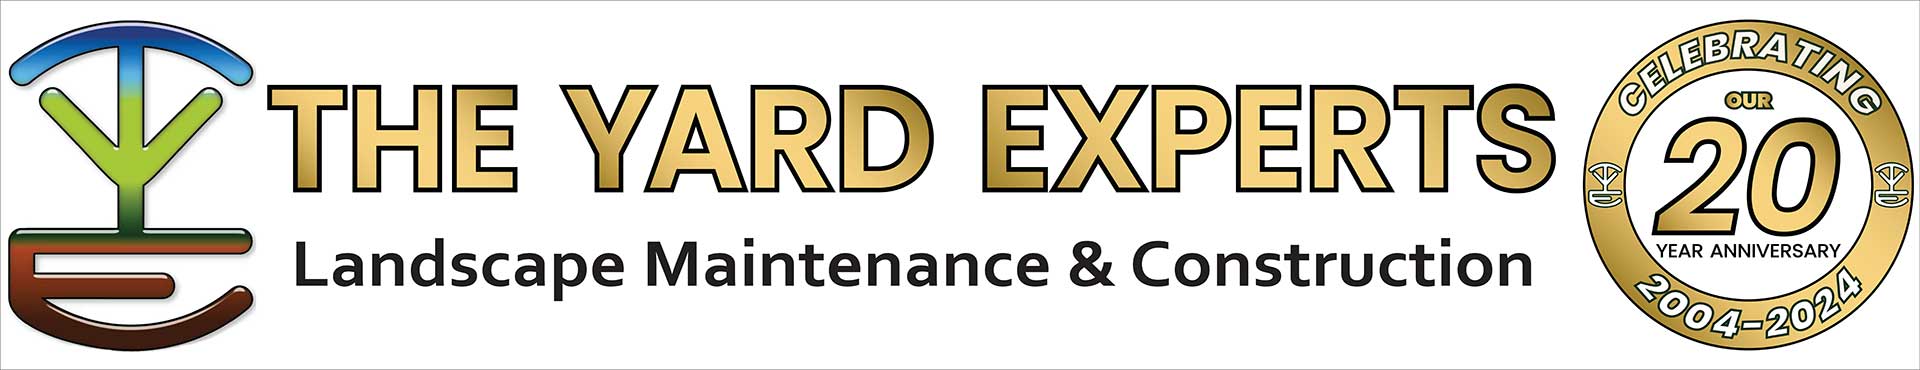 20 Anniversary Logo for the Yard Experts